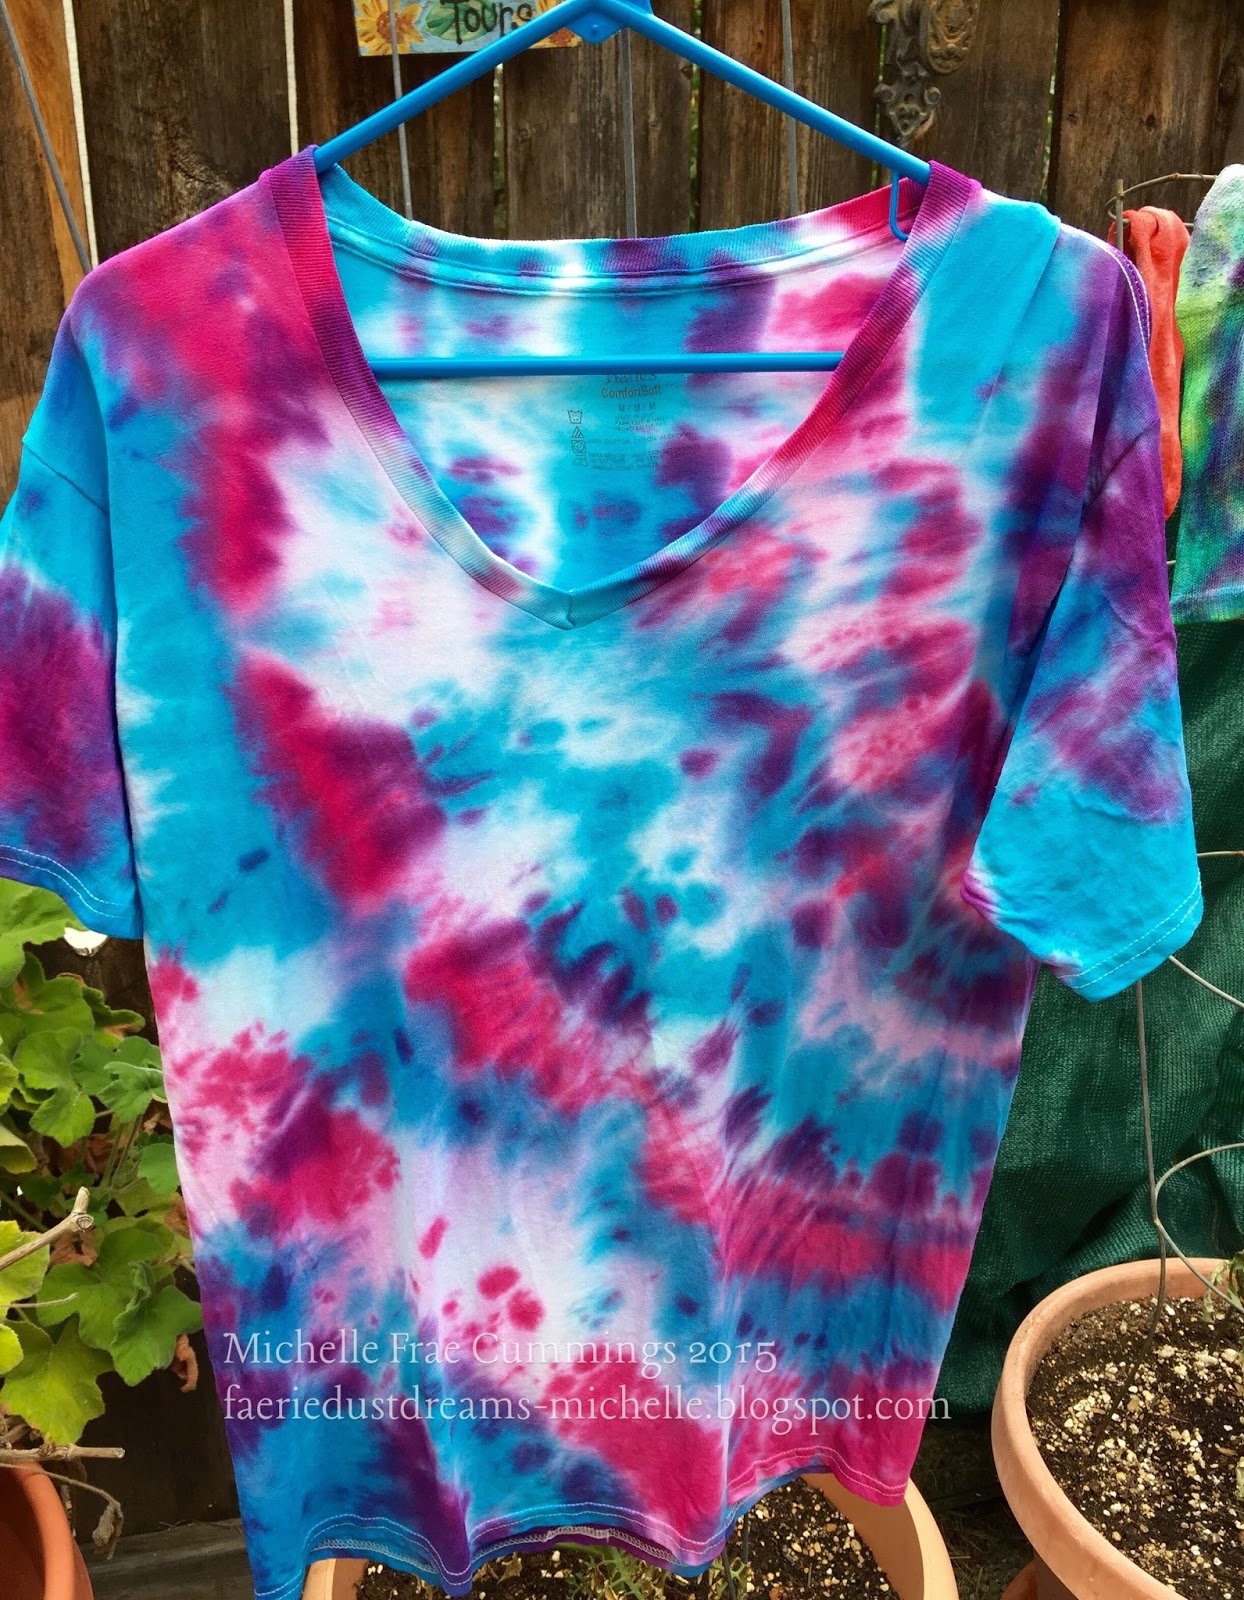 Faerie * Dust * Dreams: Jump into Summer! With Easy Colorful Tie-Dye!